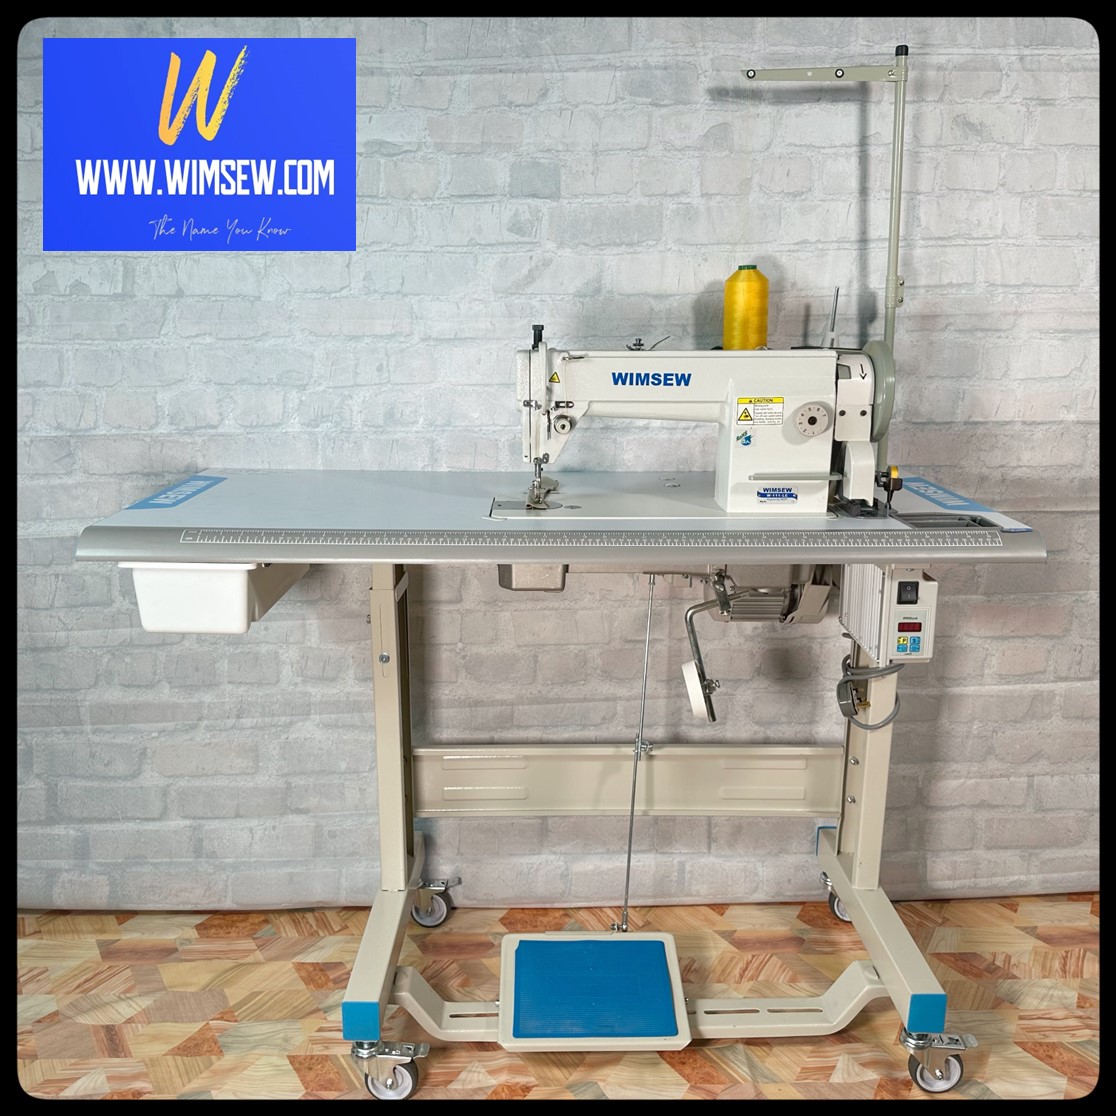 WIMSEW W111LC Machine (Wheel Stand) - Call now for more information. 020 8767 0036 - choose option 3